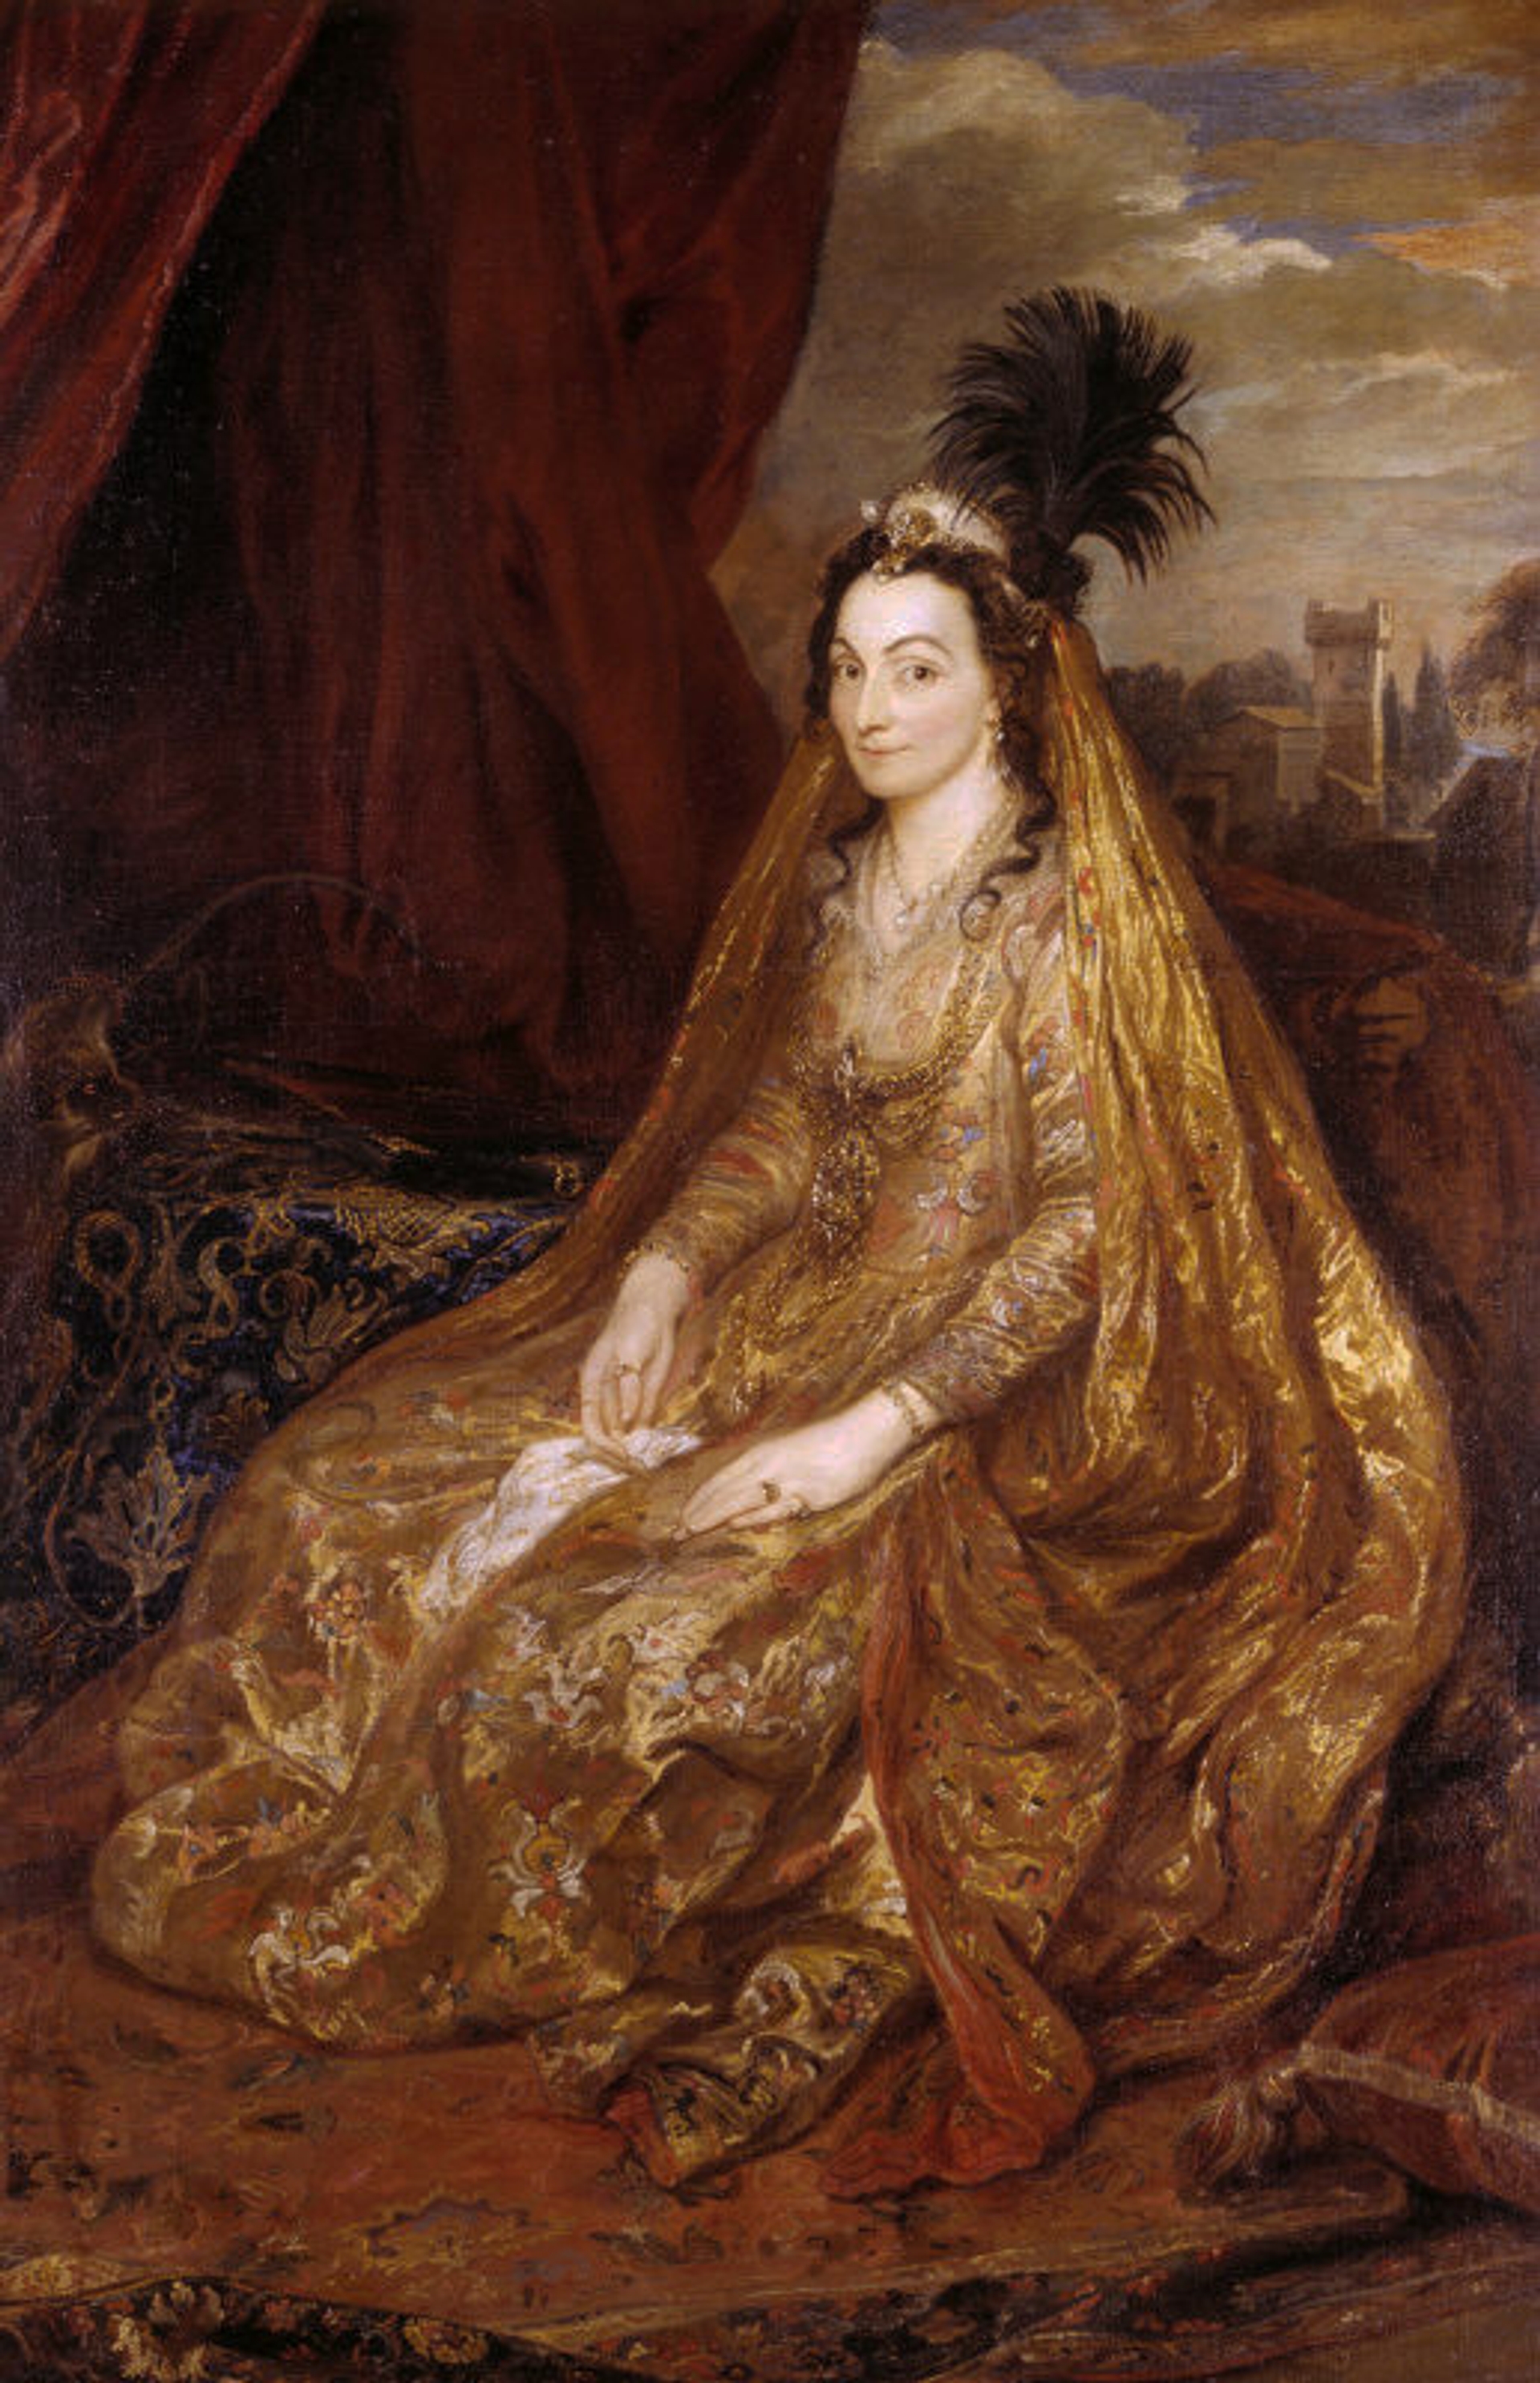 Lady Shirley by Anthony van Dyck, c. 1622